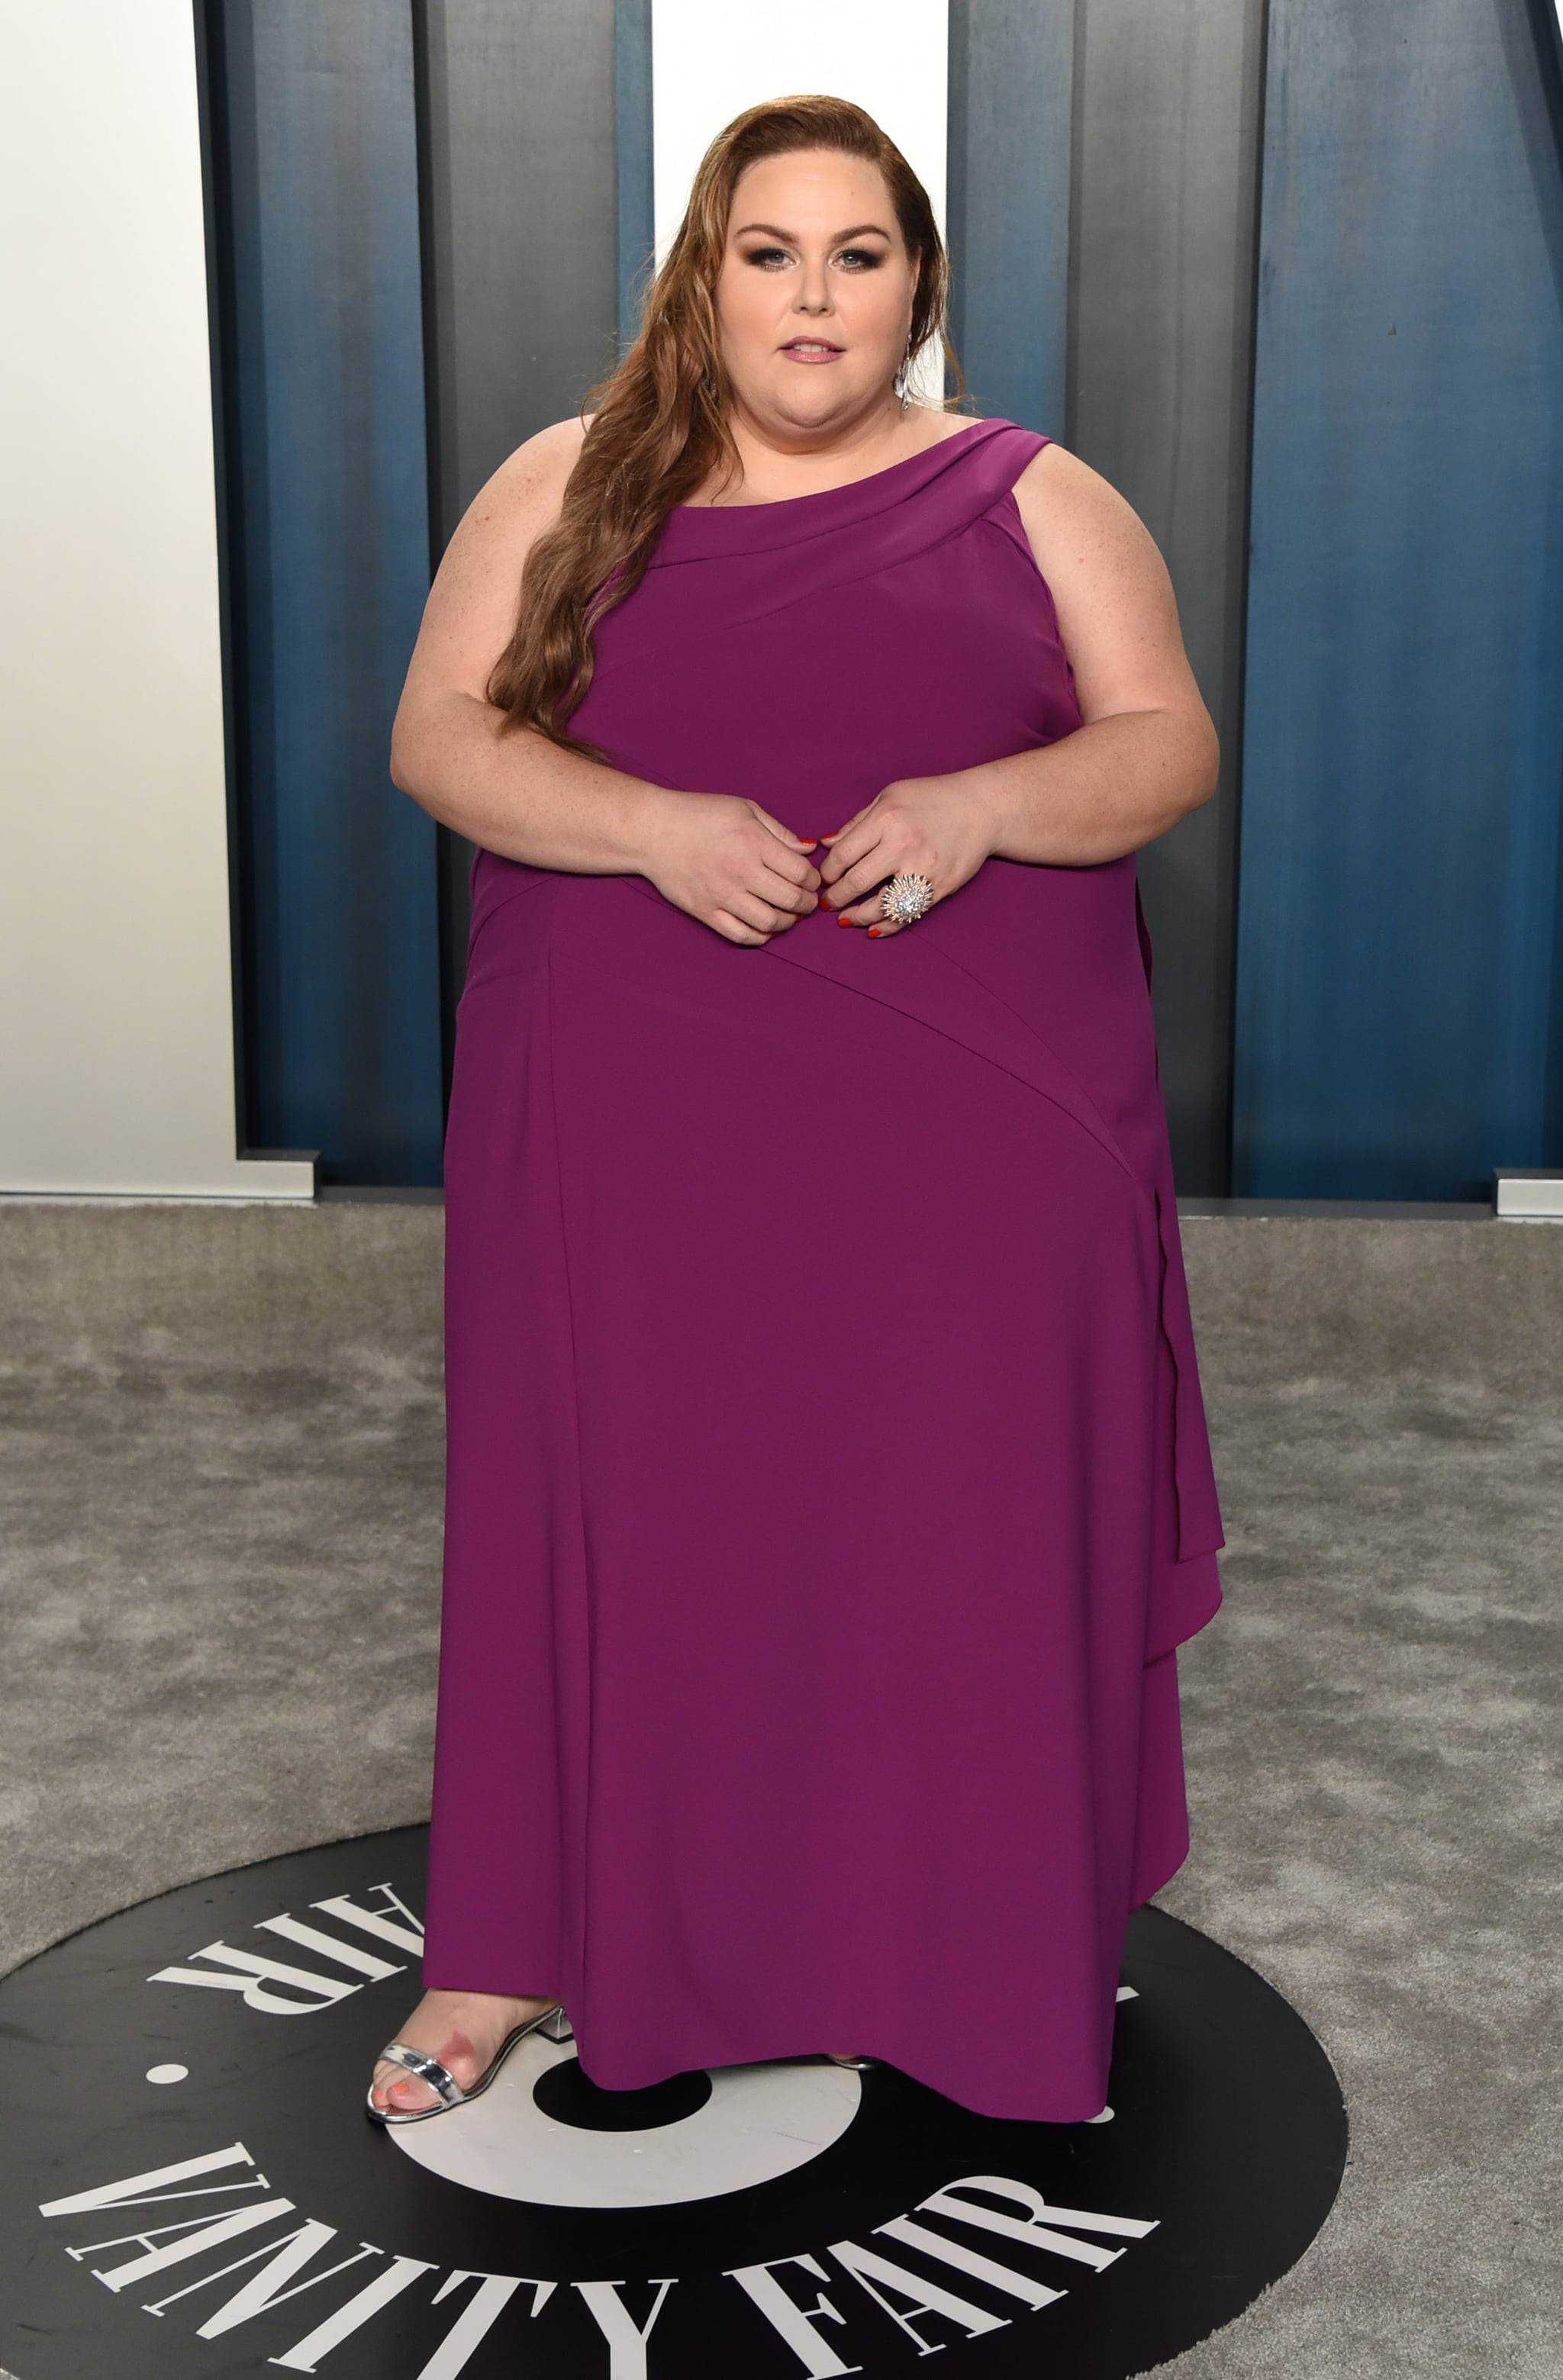 Chrissy Metz at the Vanity Fair Oscars Afterparty 2020